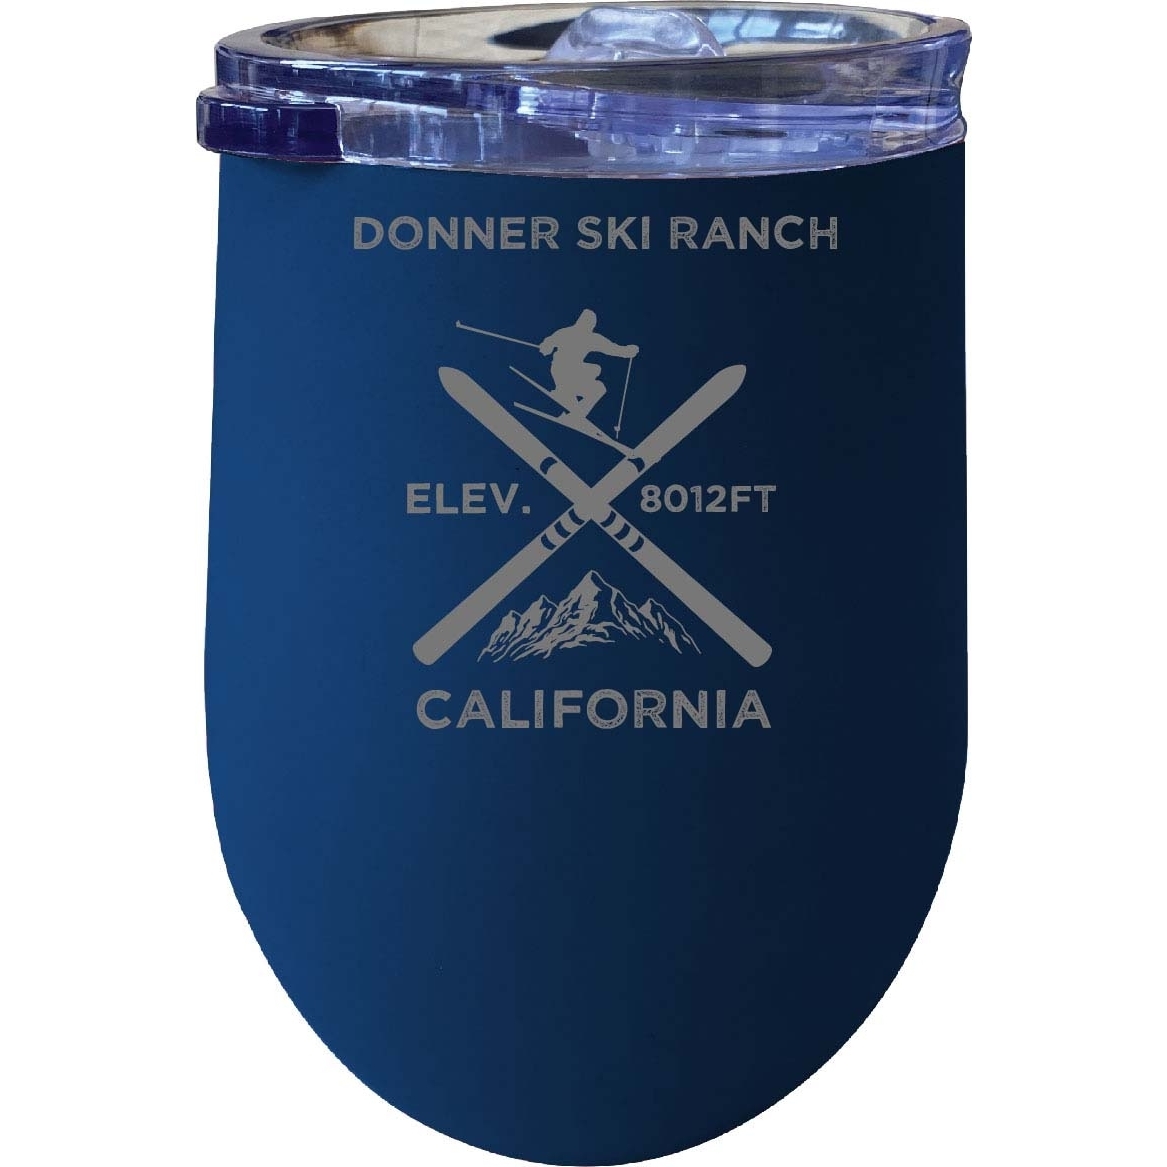 Donner Ski Ranch California Ski Souvenir 12 Oz Laser Etched Insulated Wine Stainless Steel Tumbler - Purple